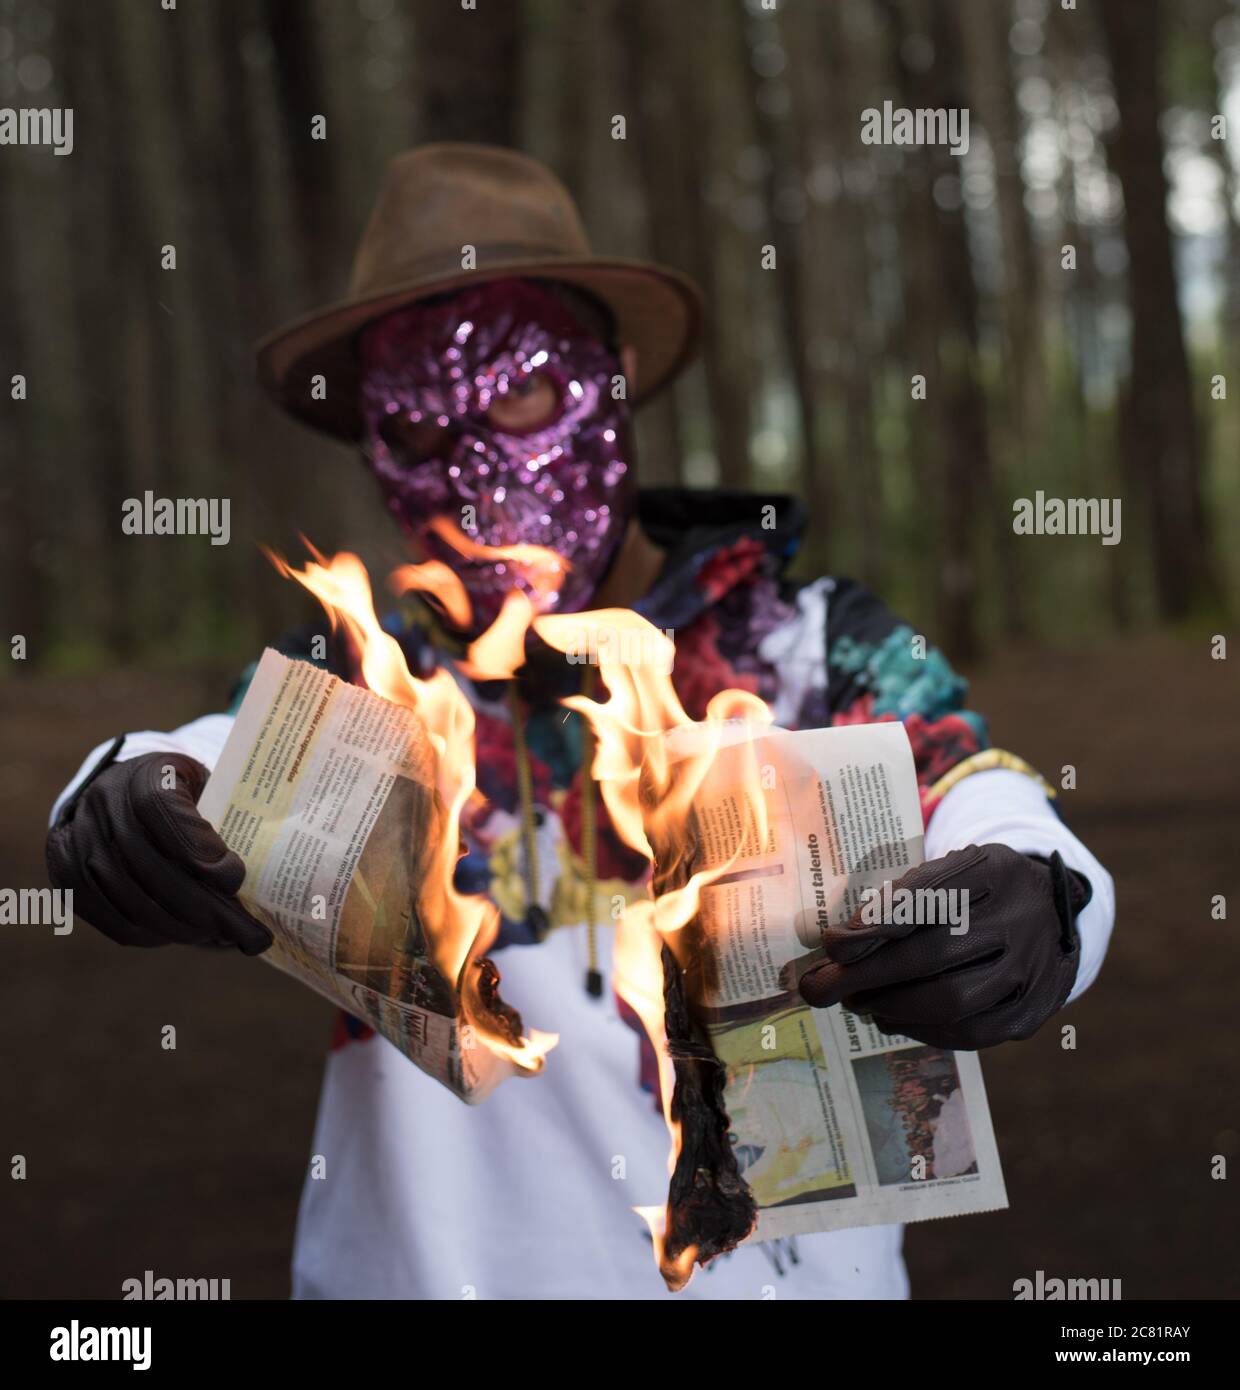 Unknown person wearing a scary face mask burning the newspaper in a forest - crime concept Stock Photo